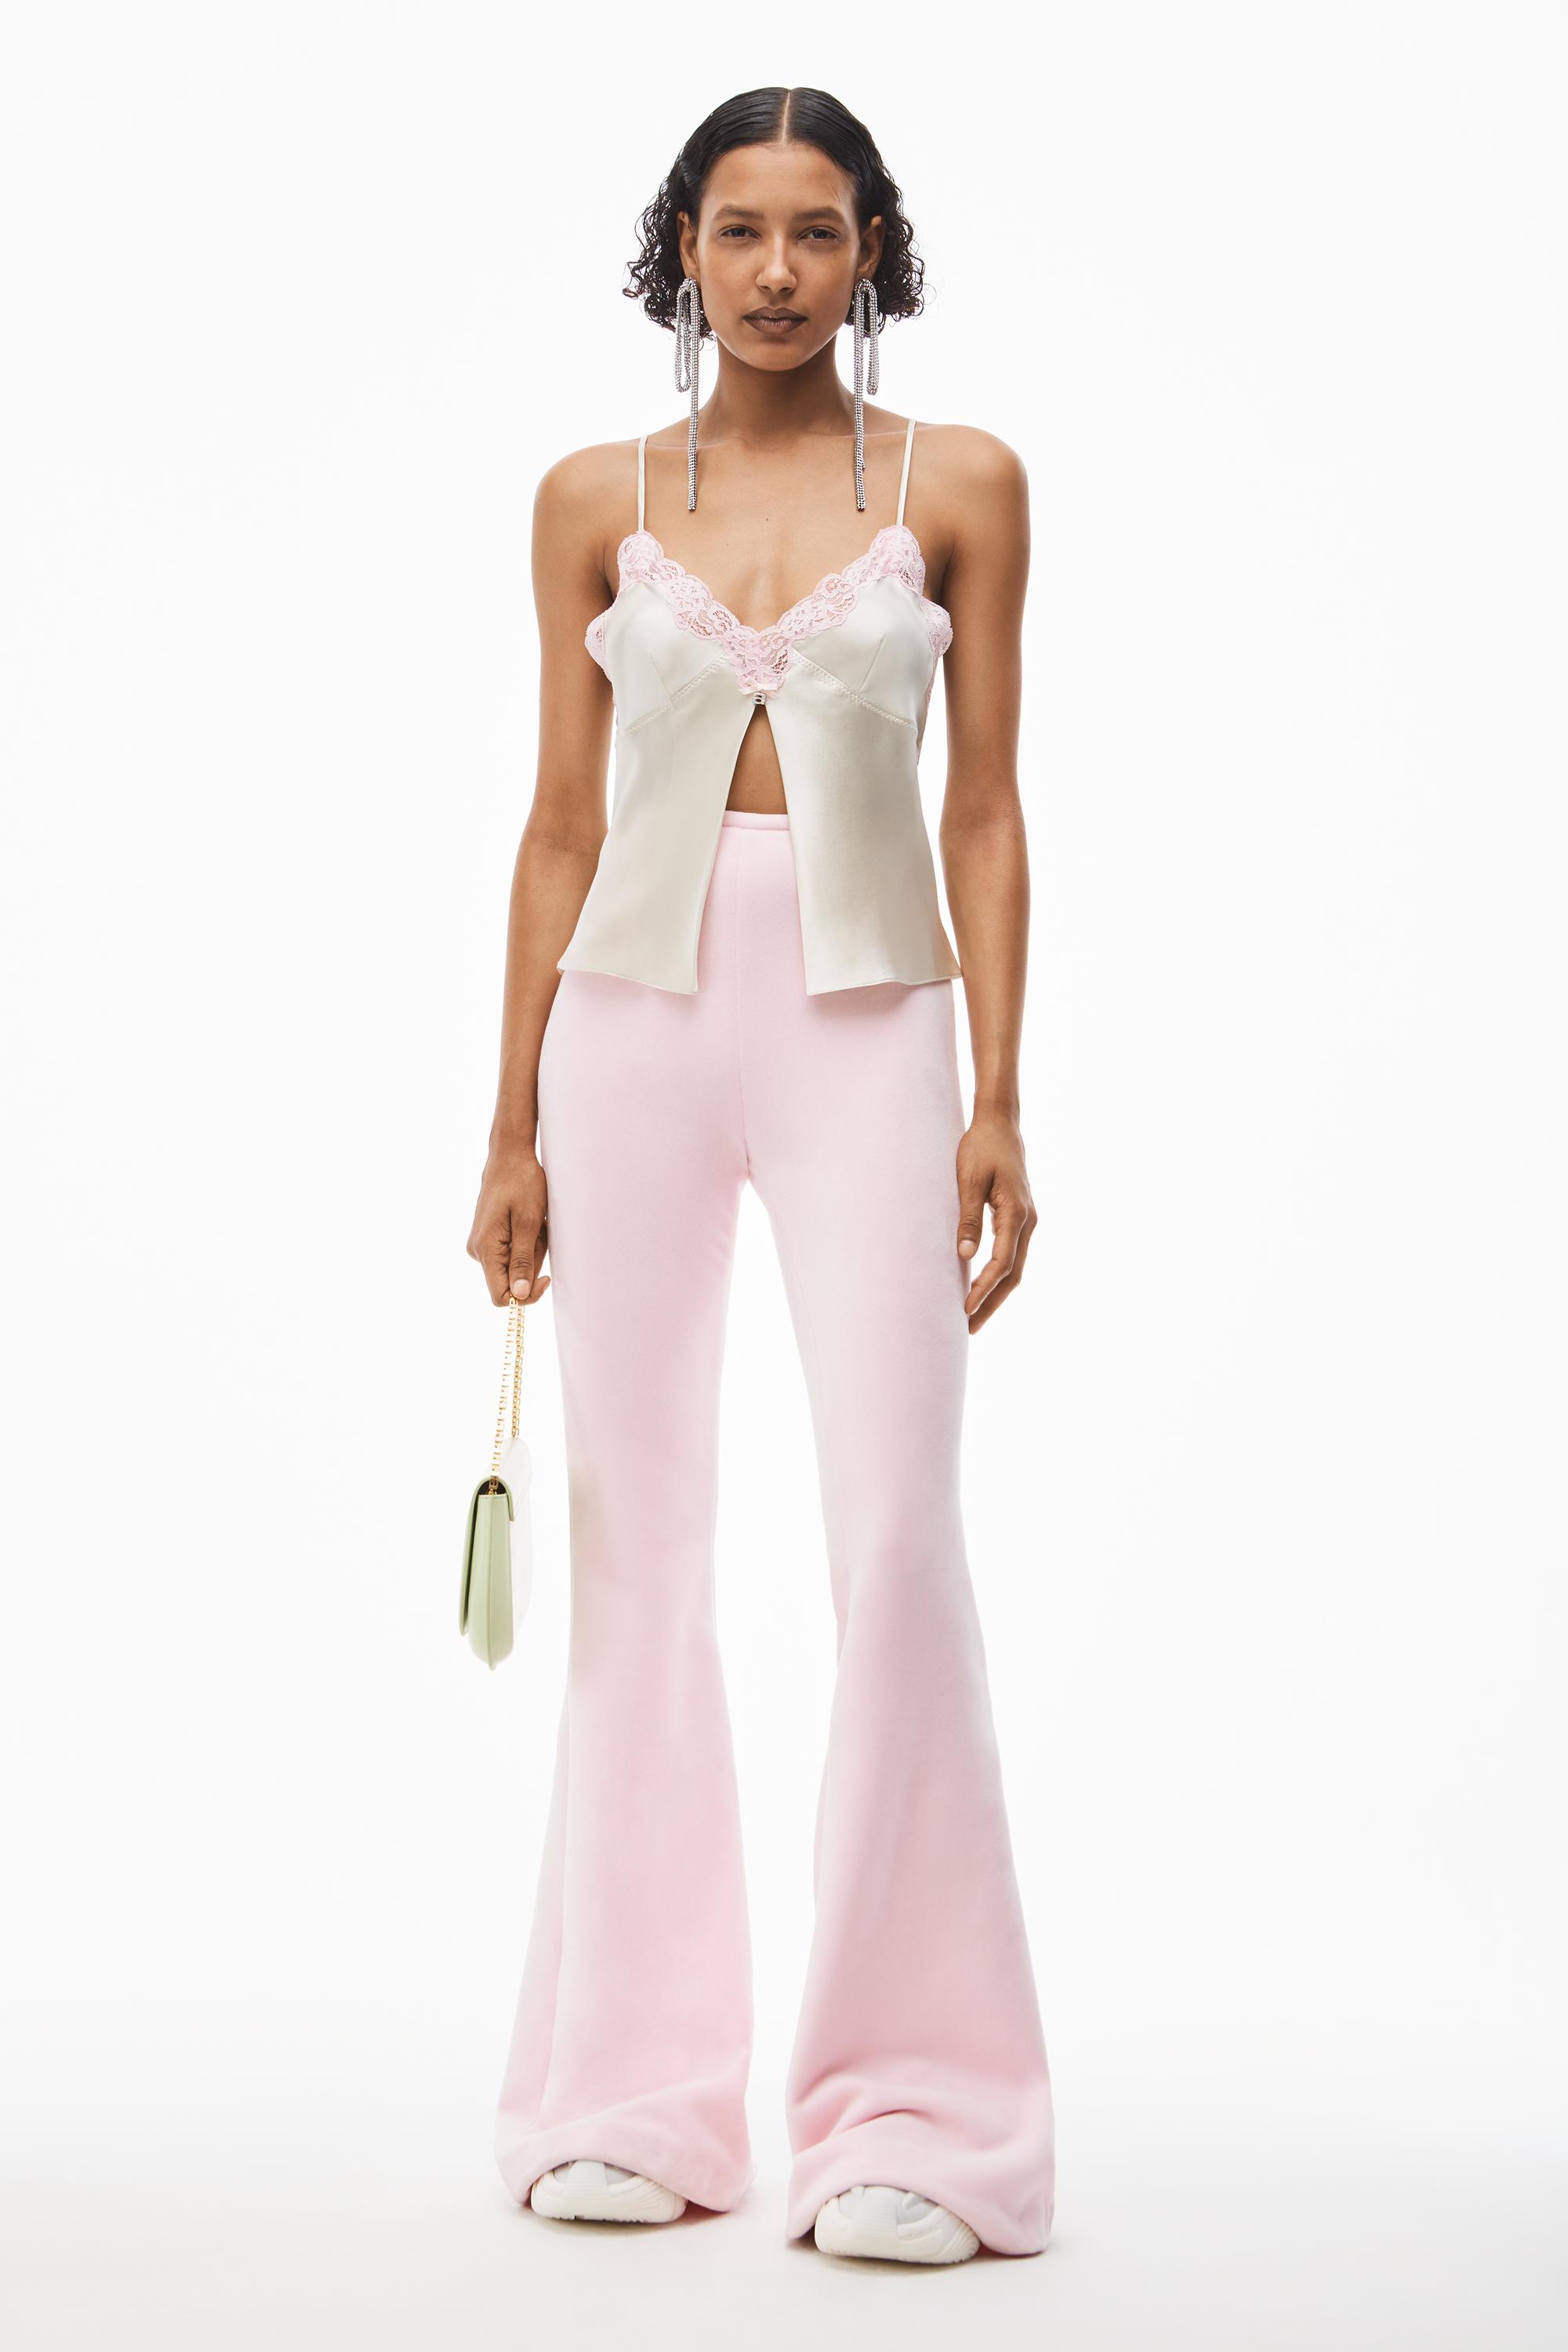 Alexander Wang Flared Pant In Velour in Pink